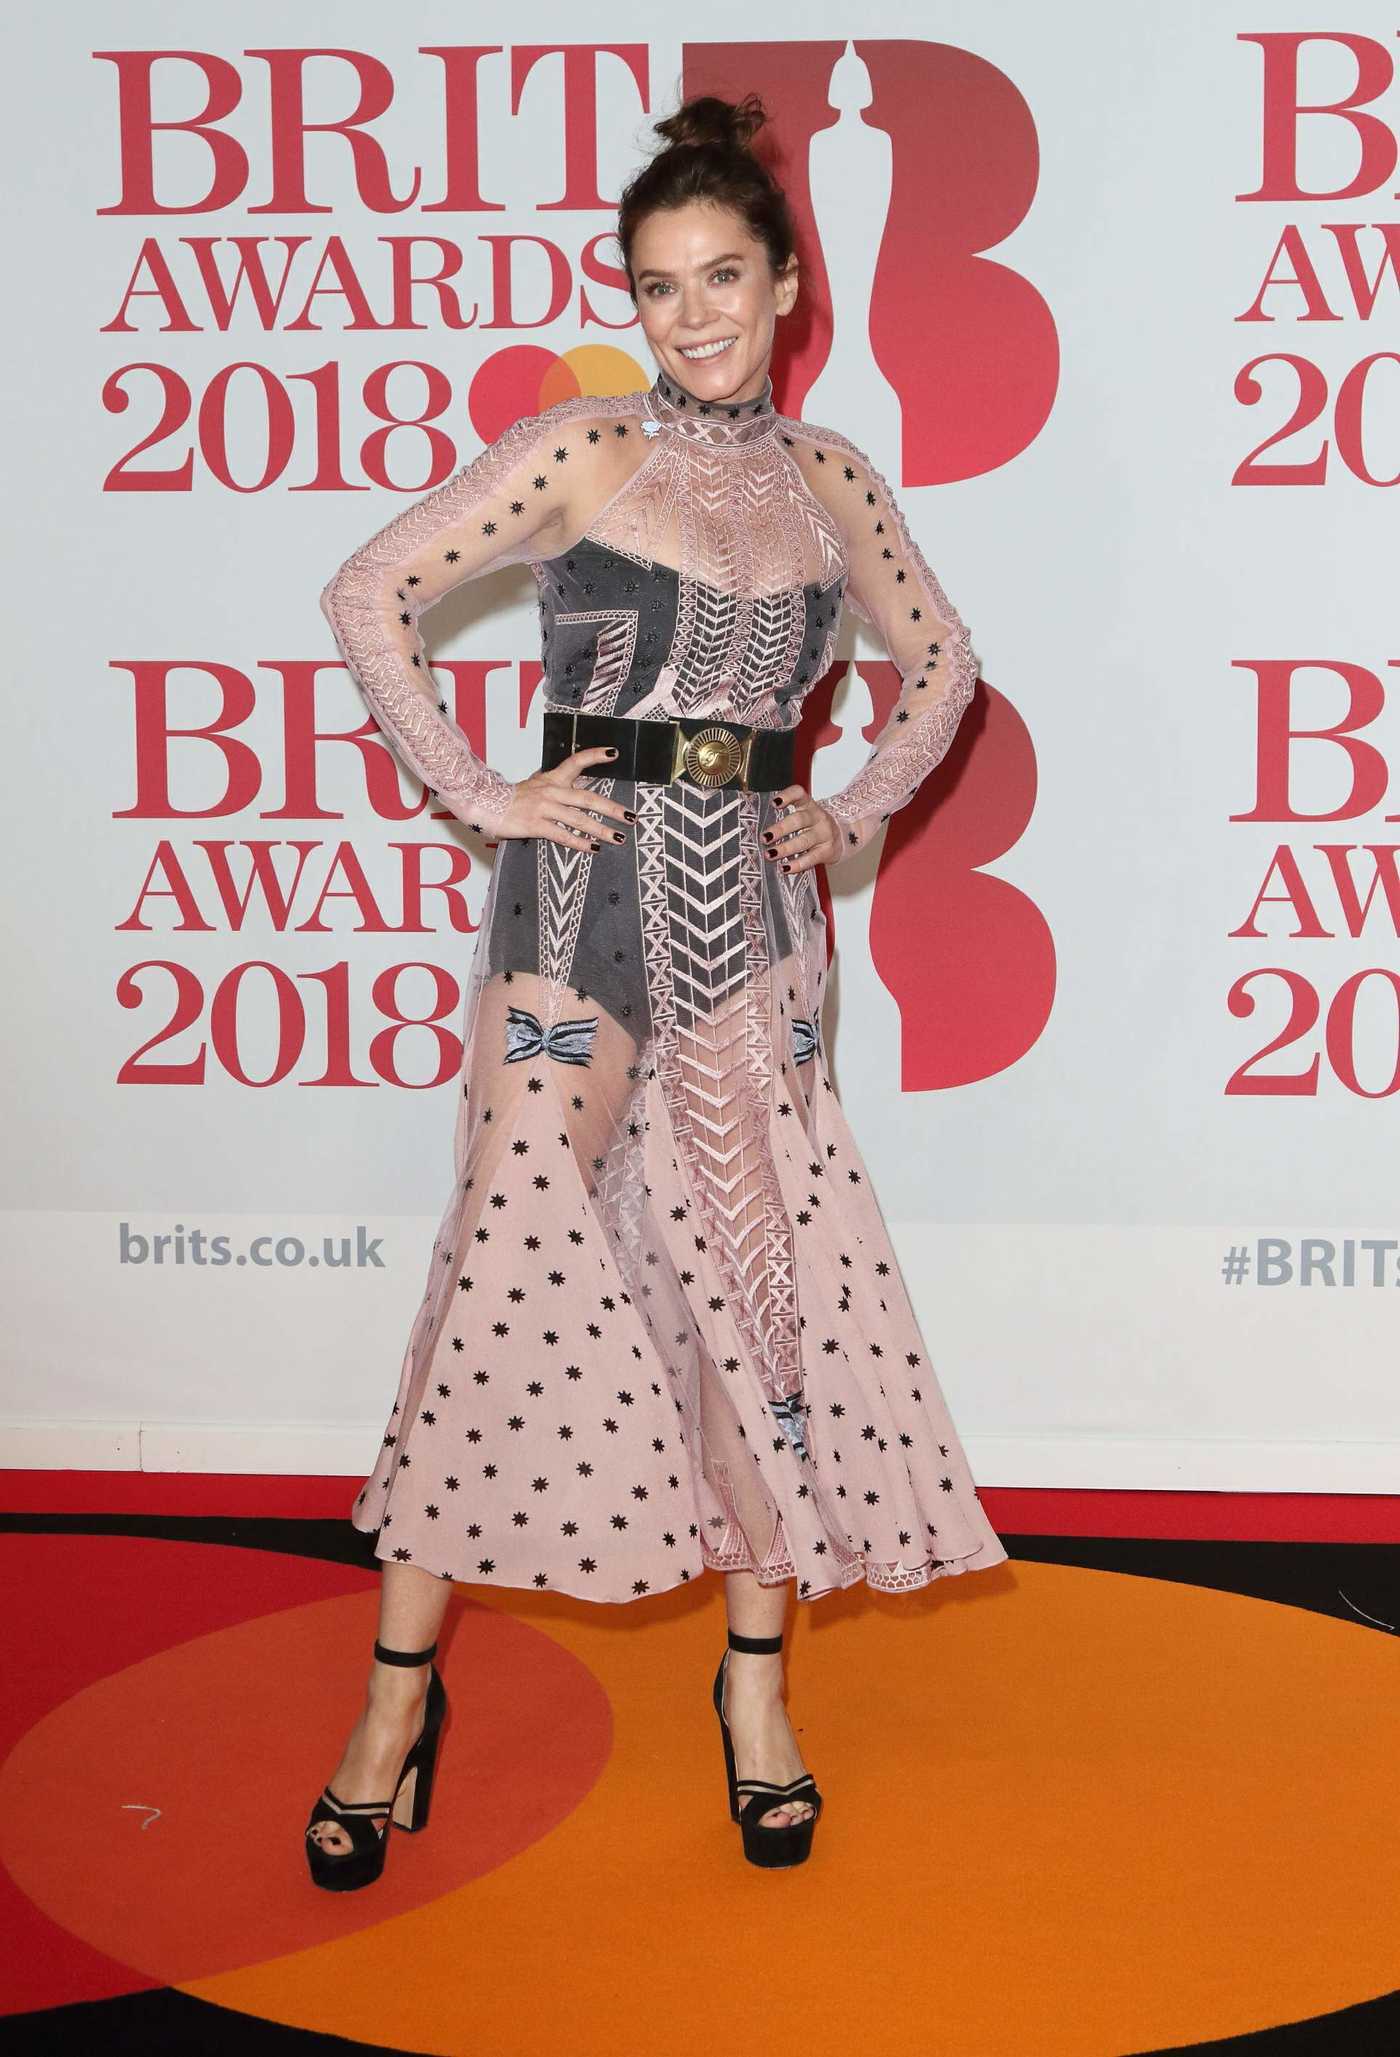 Anna Friel Attends the 2018 Brit Awards at the O2 Arena in London 02/21/2018